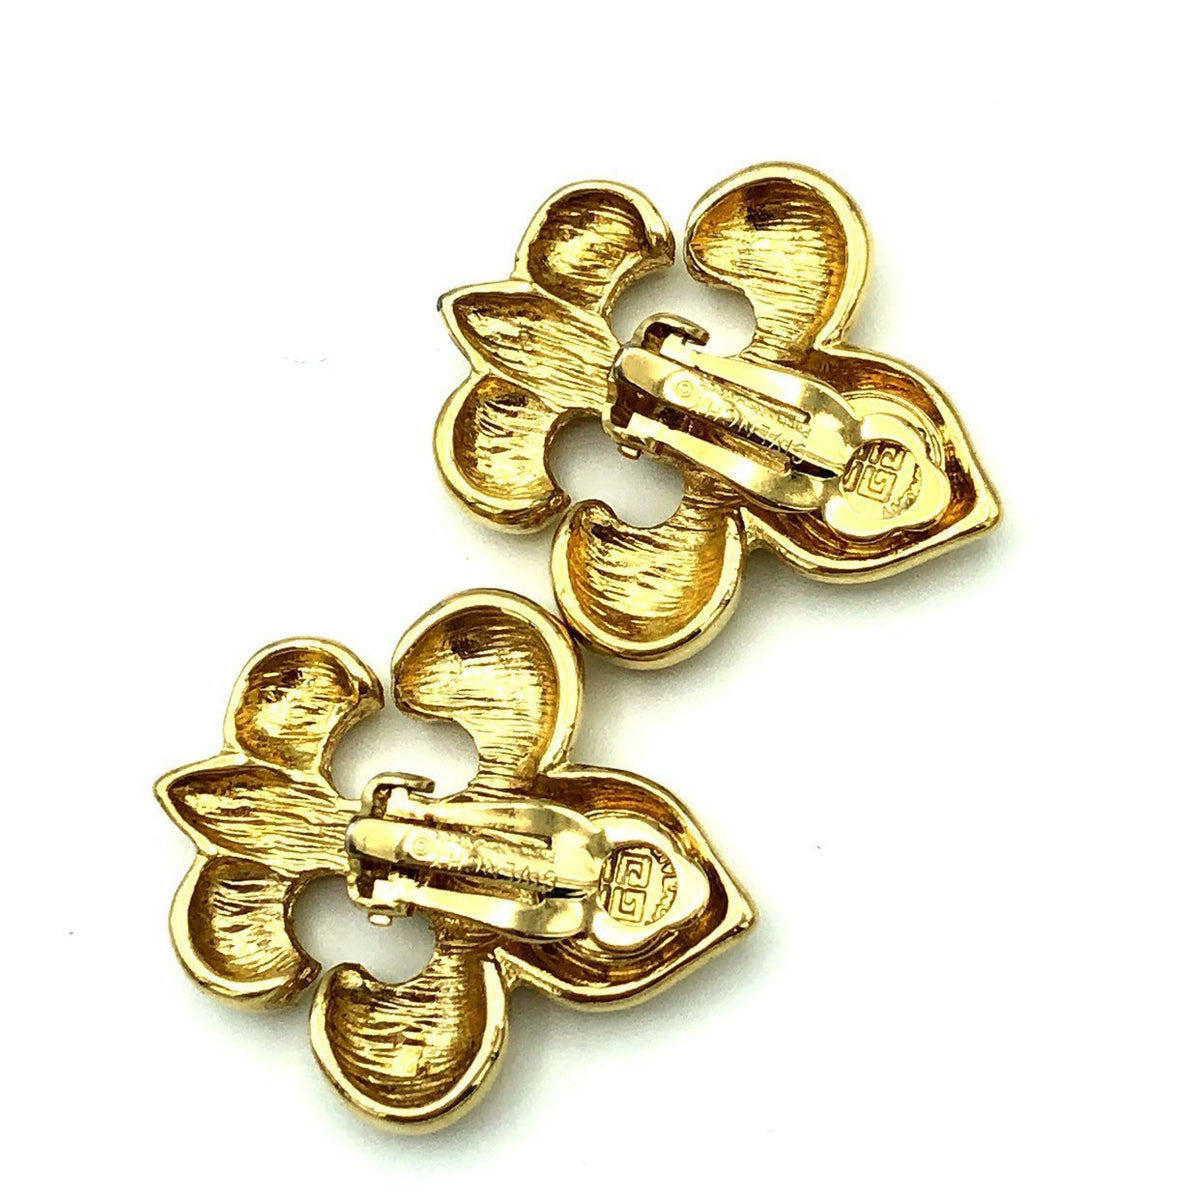 Givenchy Gold Fleur de Lis Vintage Clip-On Earrings - 24 Wishes Vintage Jewelry